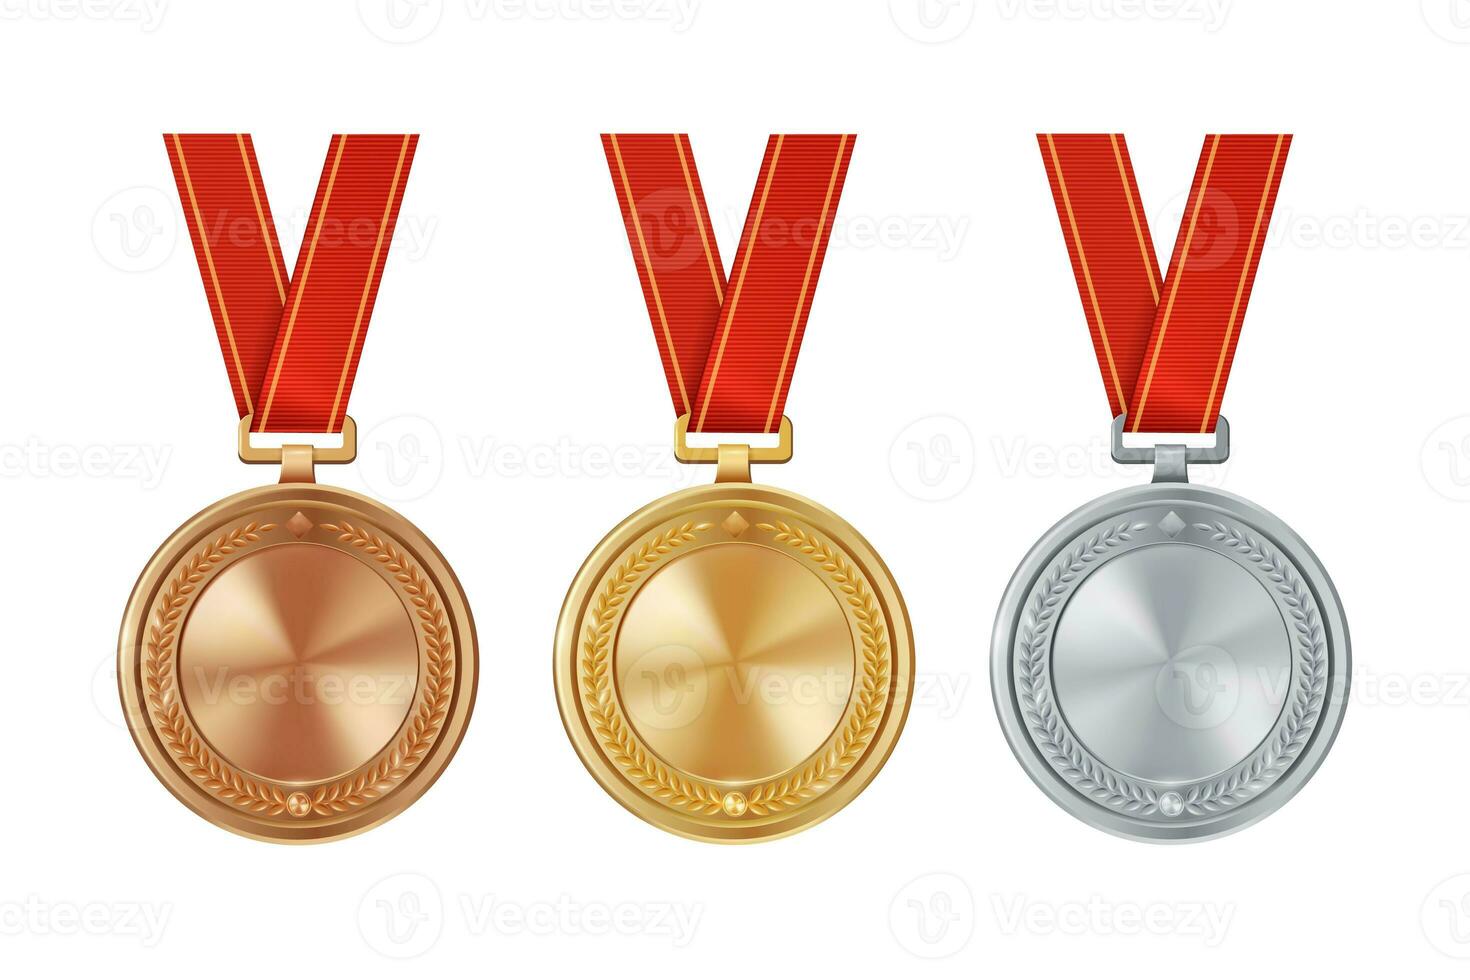 Set of realistic gold, silver, and bronze empty medals on red ribbons. Sports competition awards for 1st, 2nd, and 3rd place. Championship rewards for victories and achievements photo